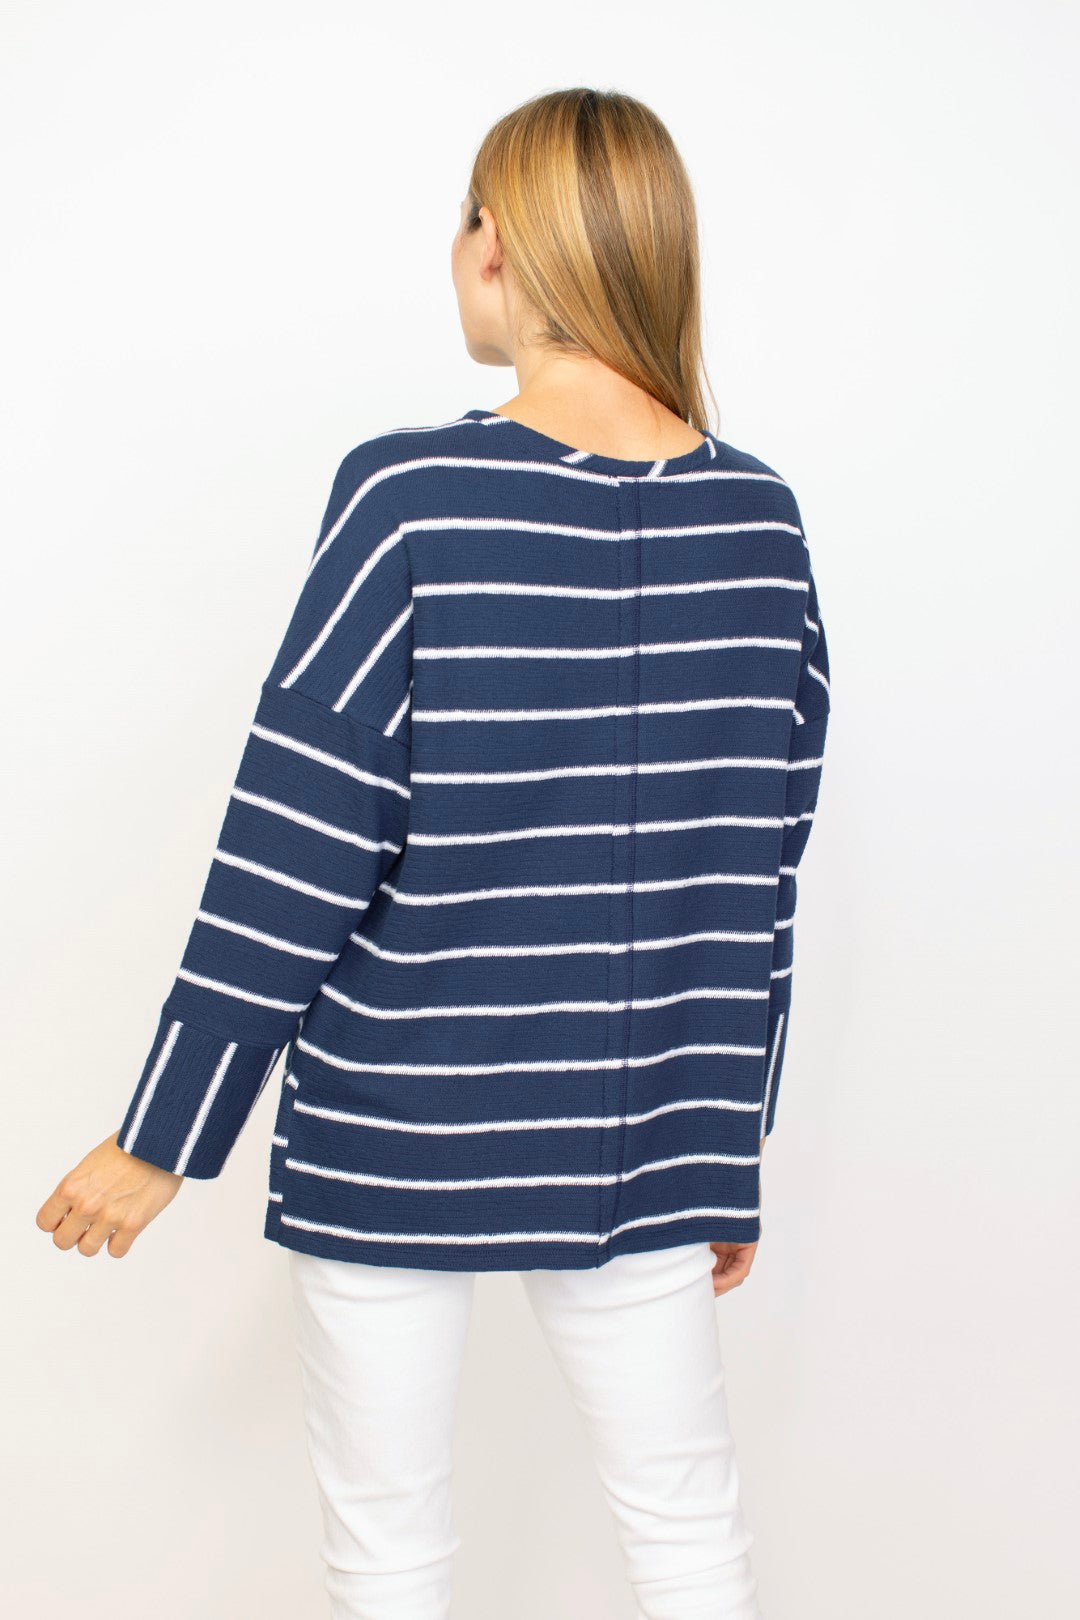 HABITAT FRENCH TERRY STRIPED CREW NECK PULLOVER